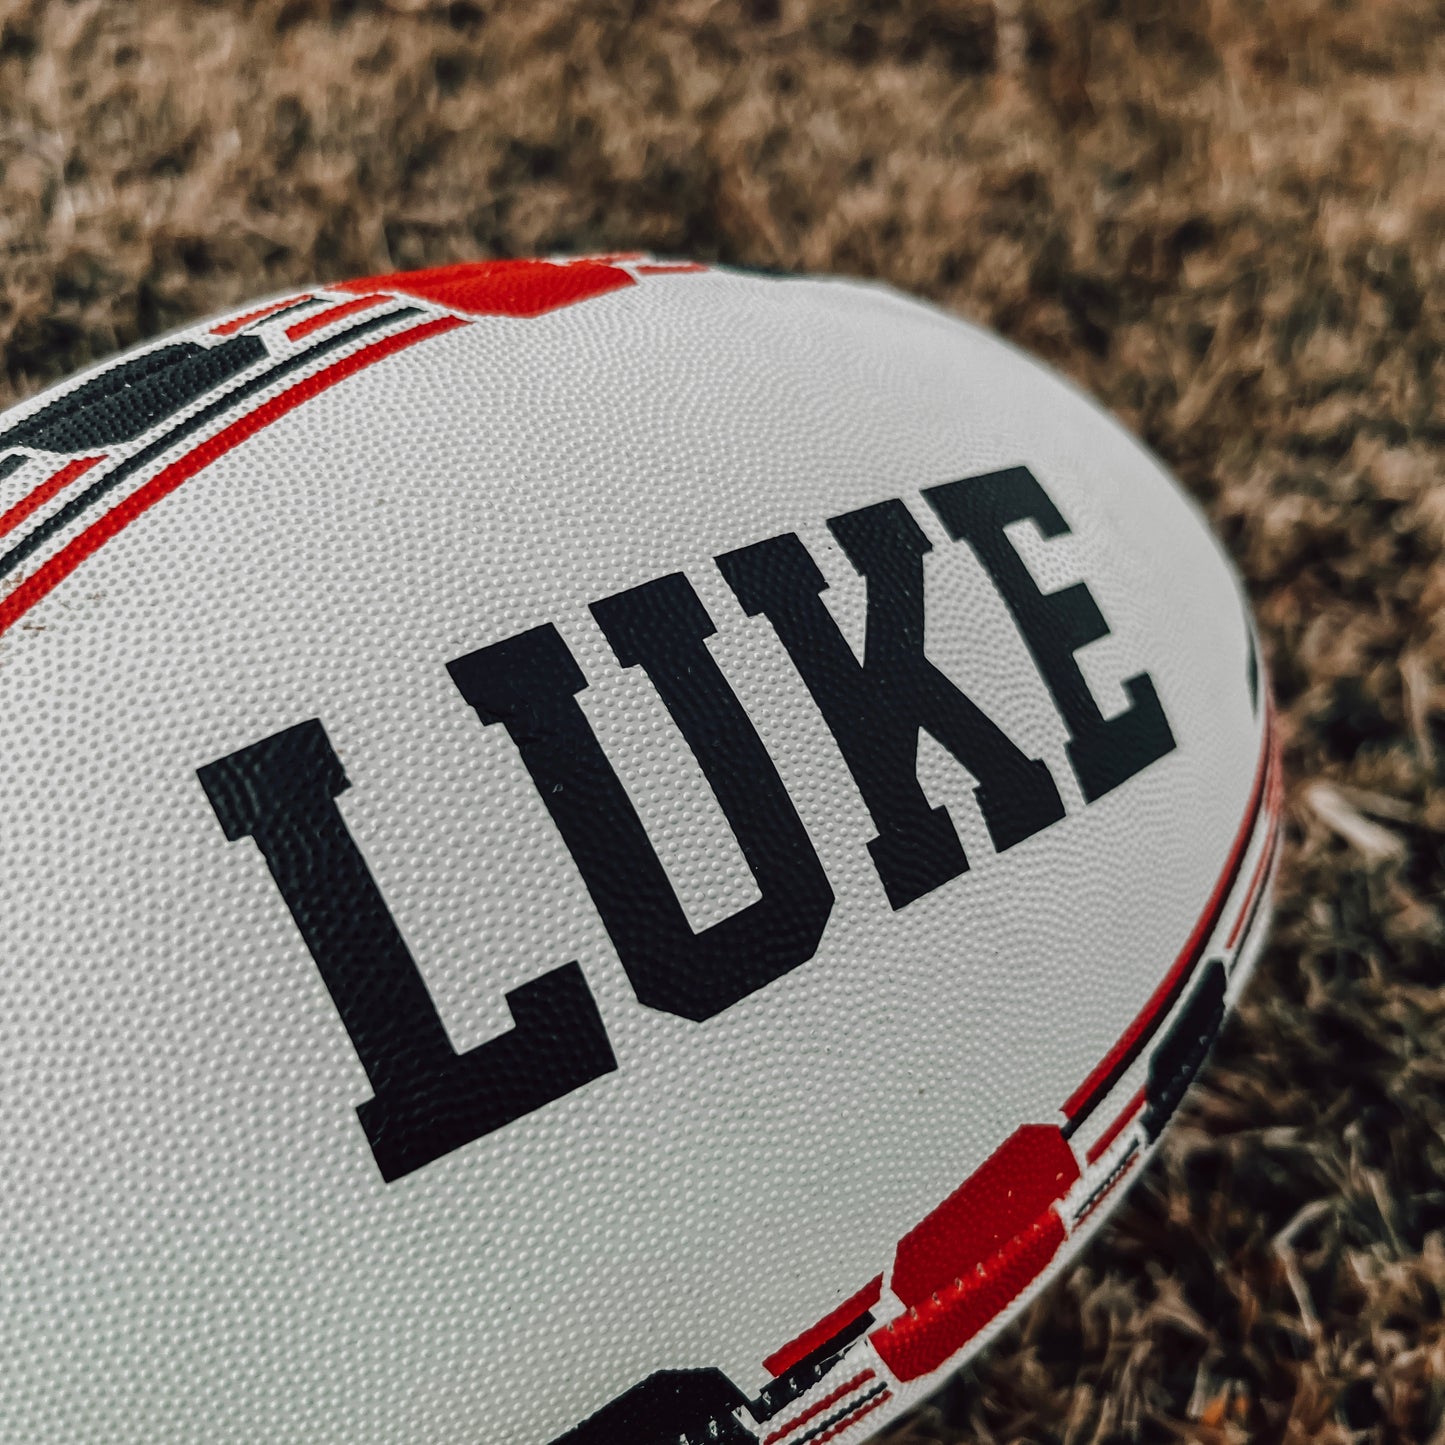 The Personalised Sport Balls